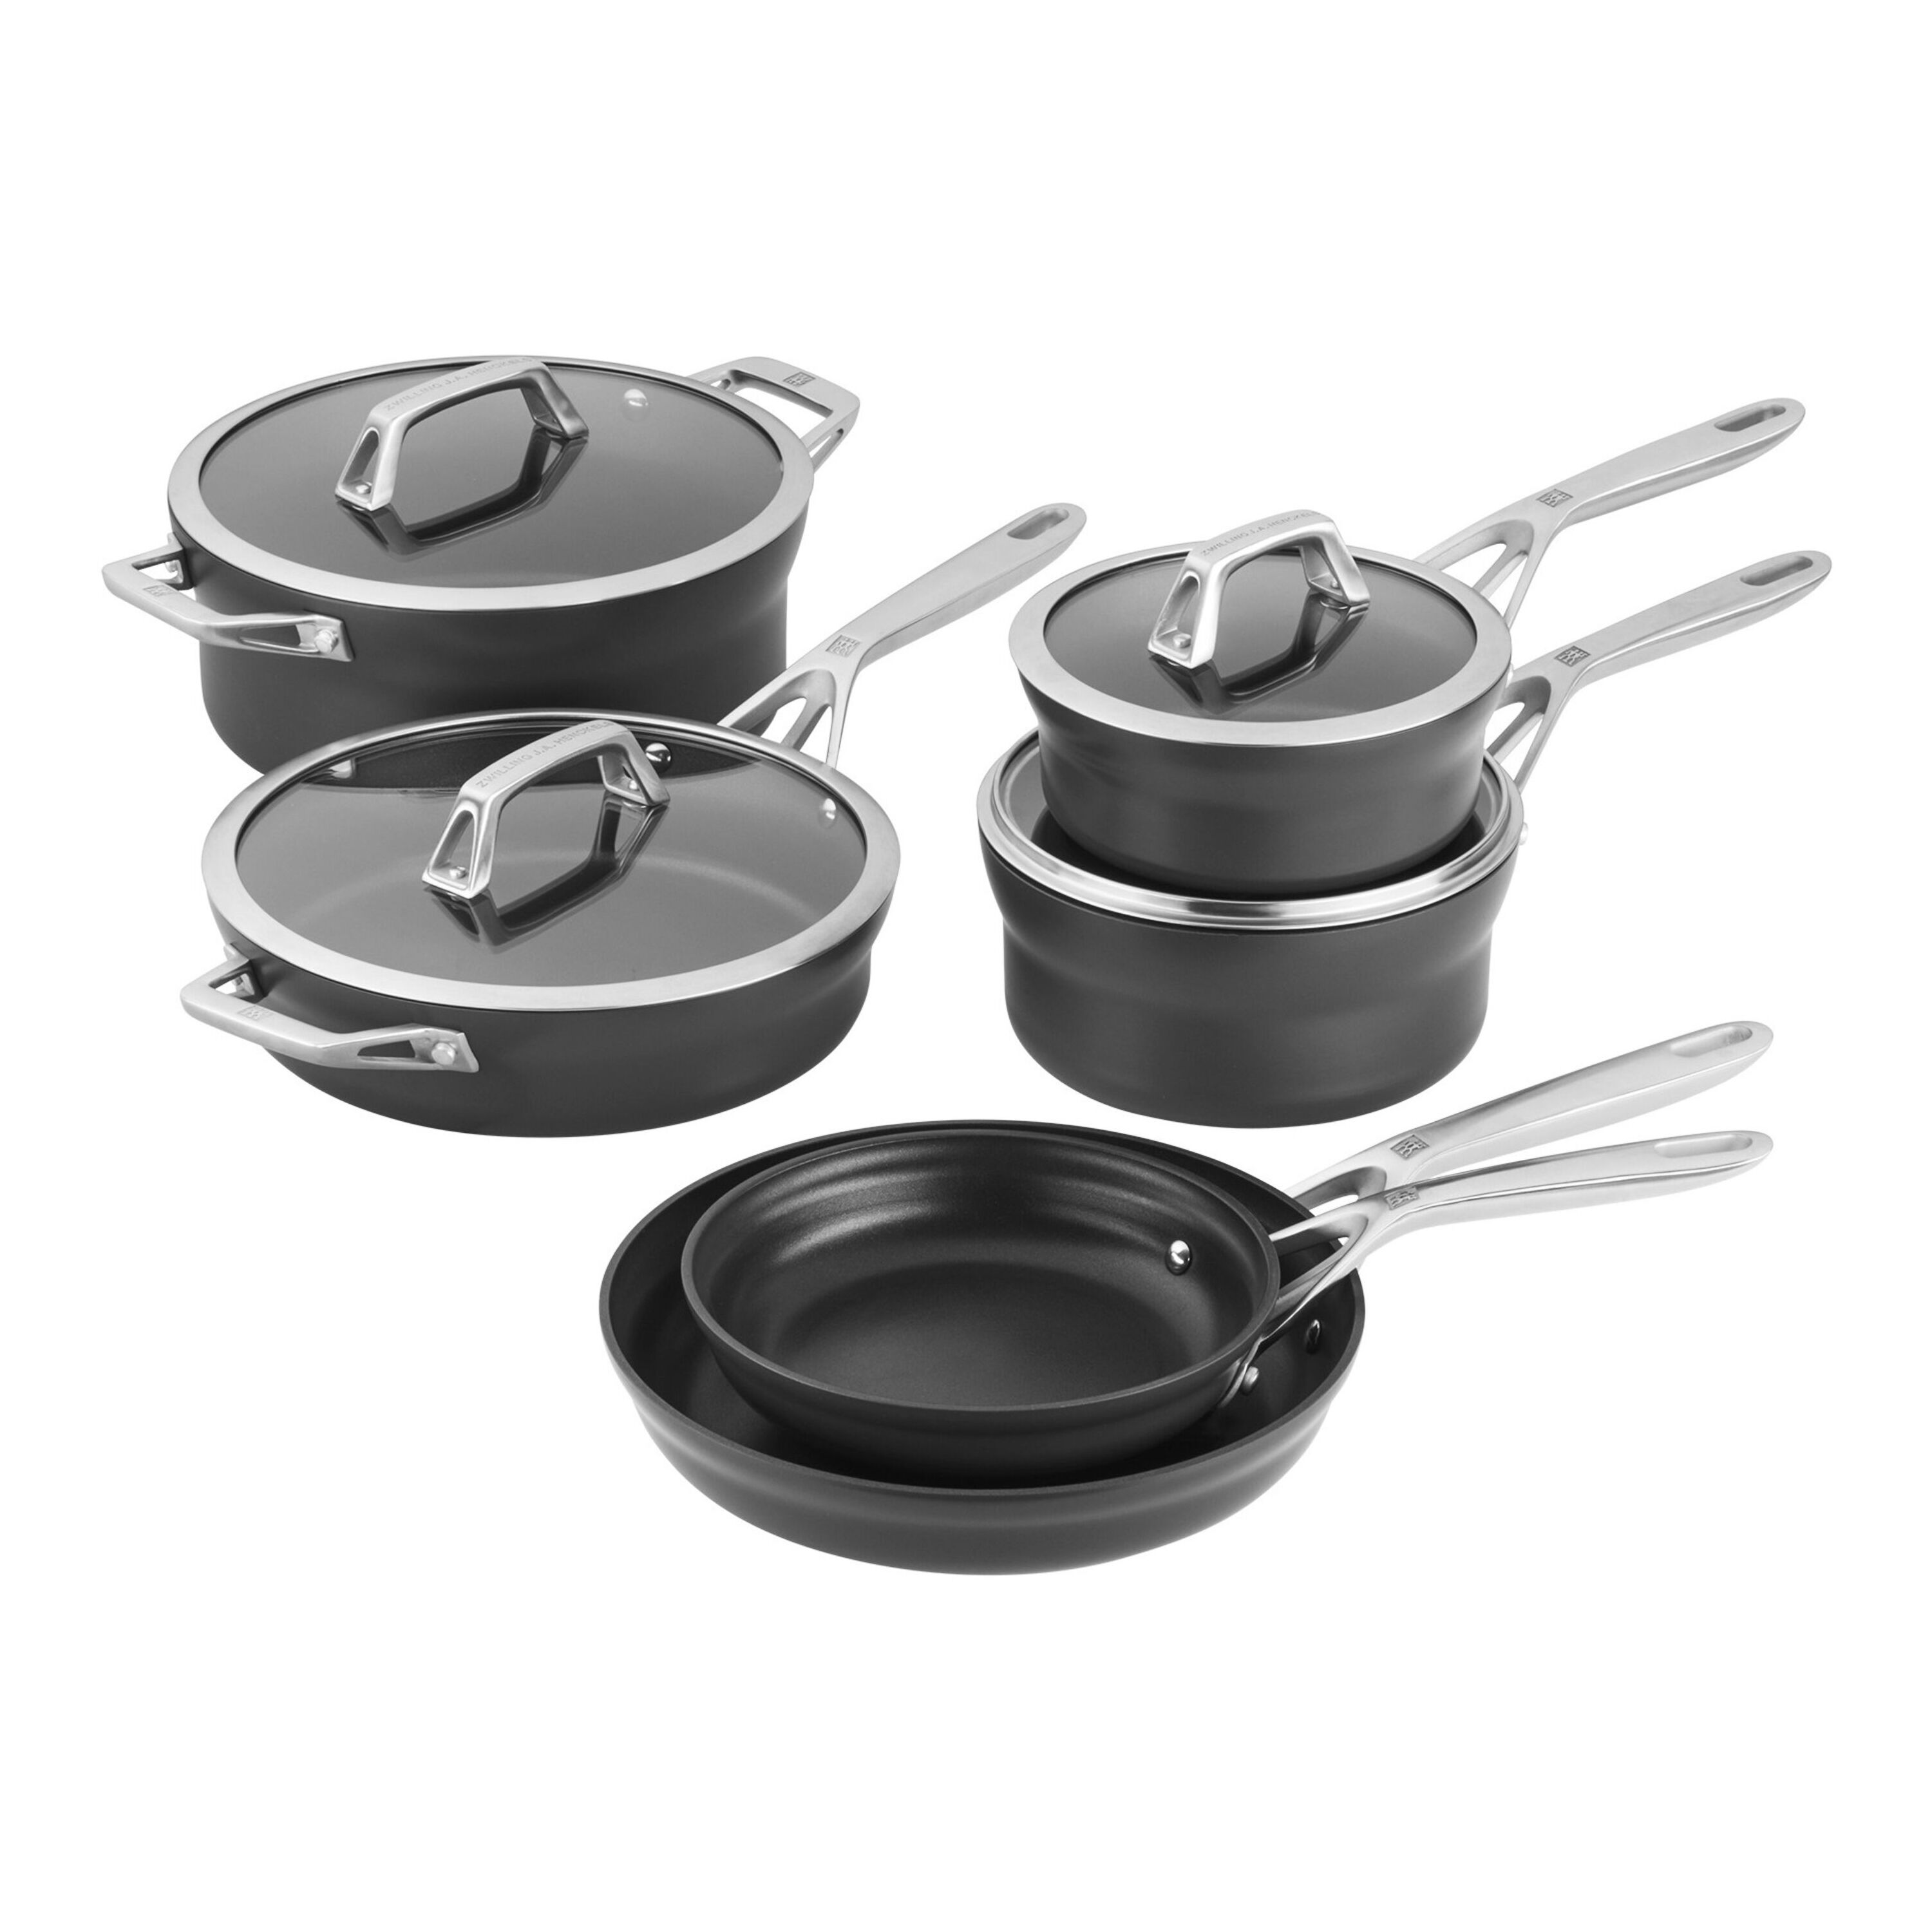 Zwilling Energy Nonstick Cookware Review - Consumer Reports